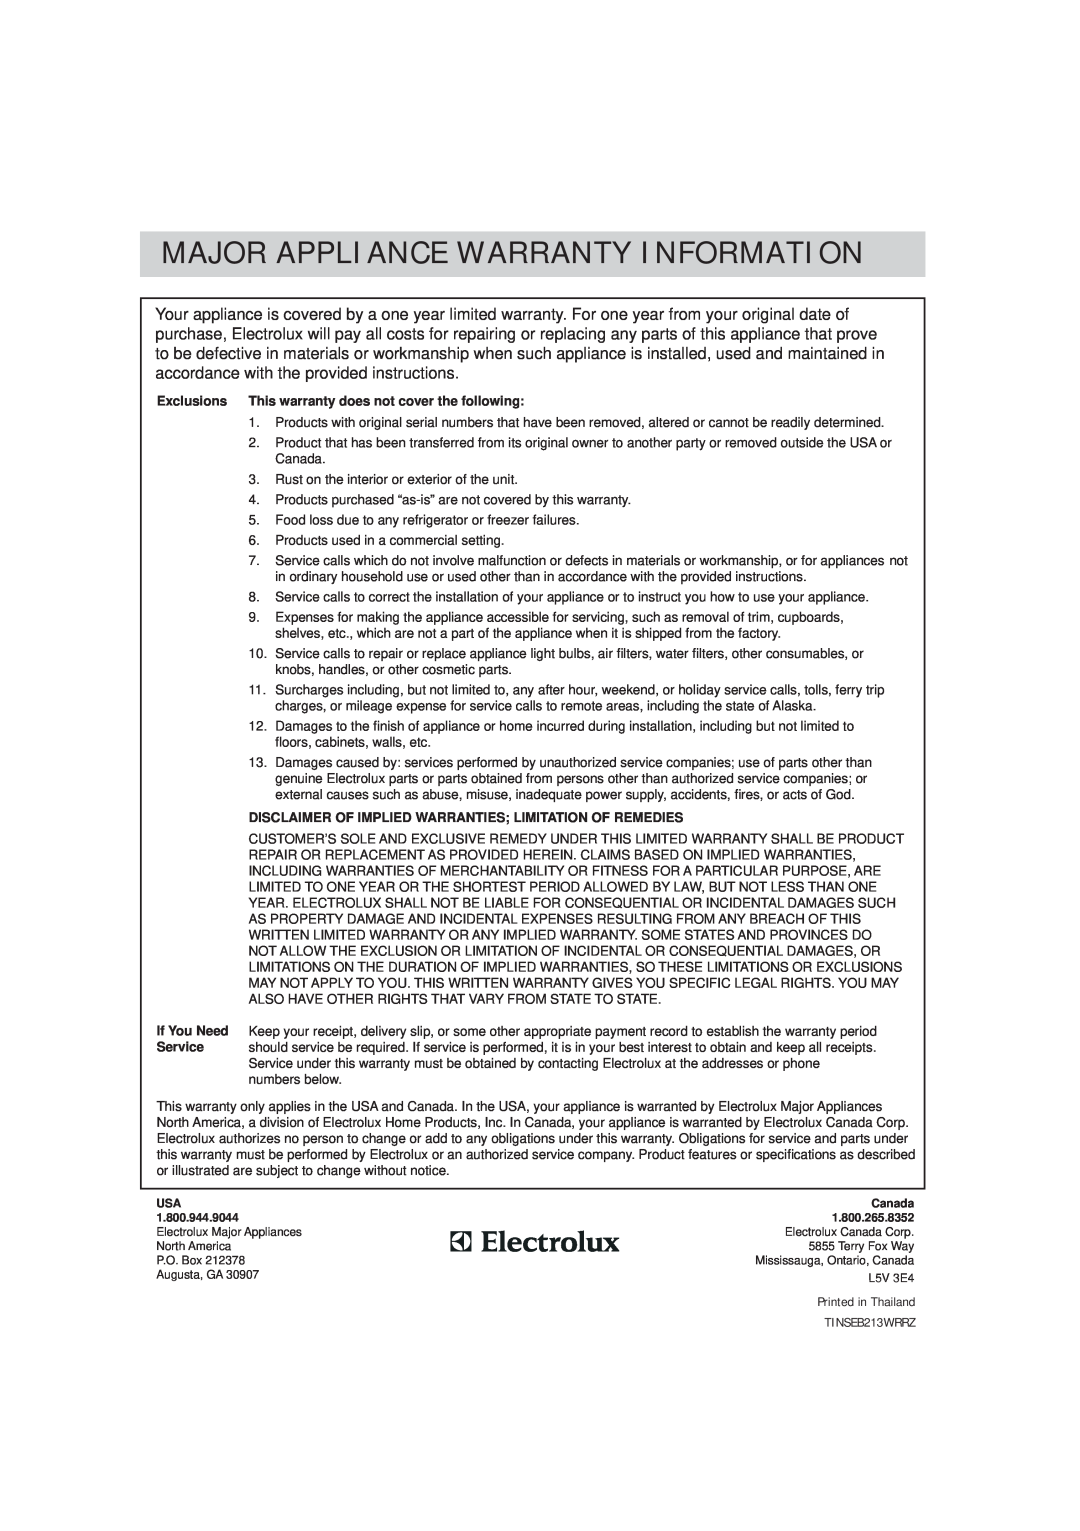 Frigidaire DGMV174KF, 16495056 Major Appliance Warranty Information, Exclusions This warranty does not cover the following 